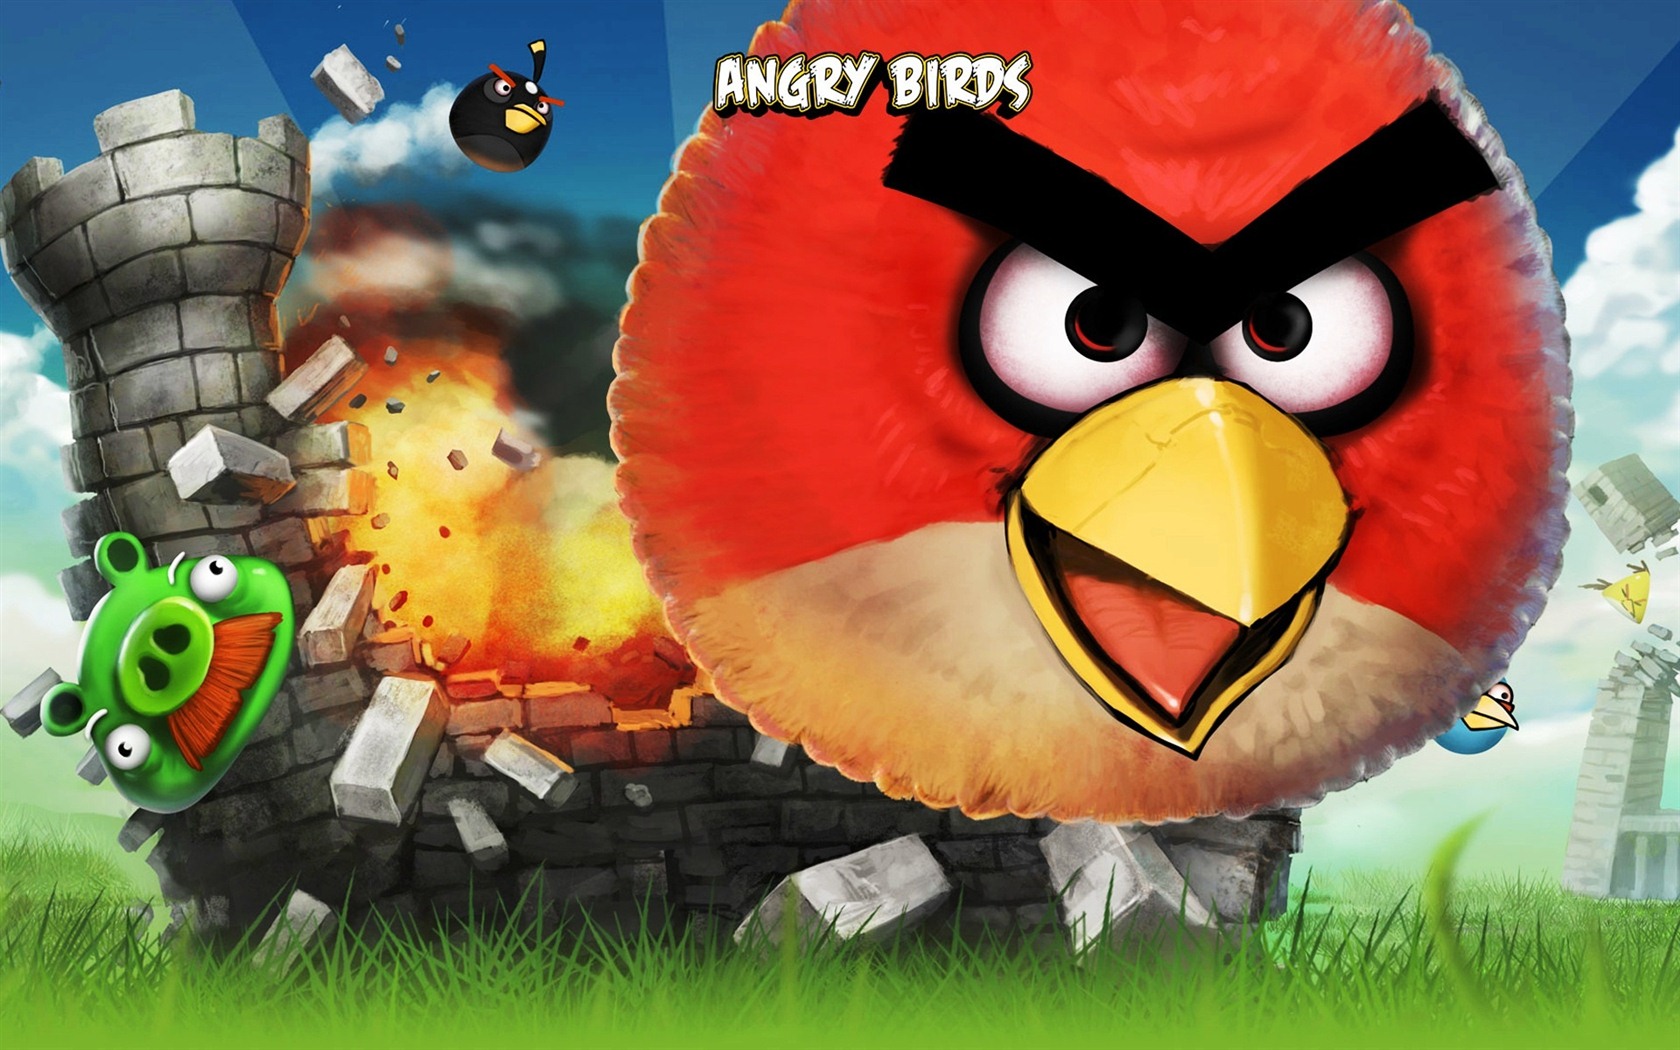 Angry Birds Game Wallpapers #7 - 1680x1050